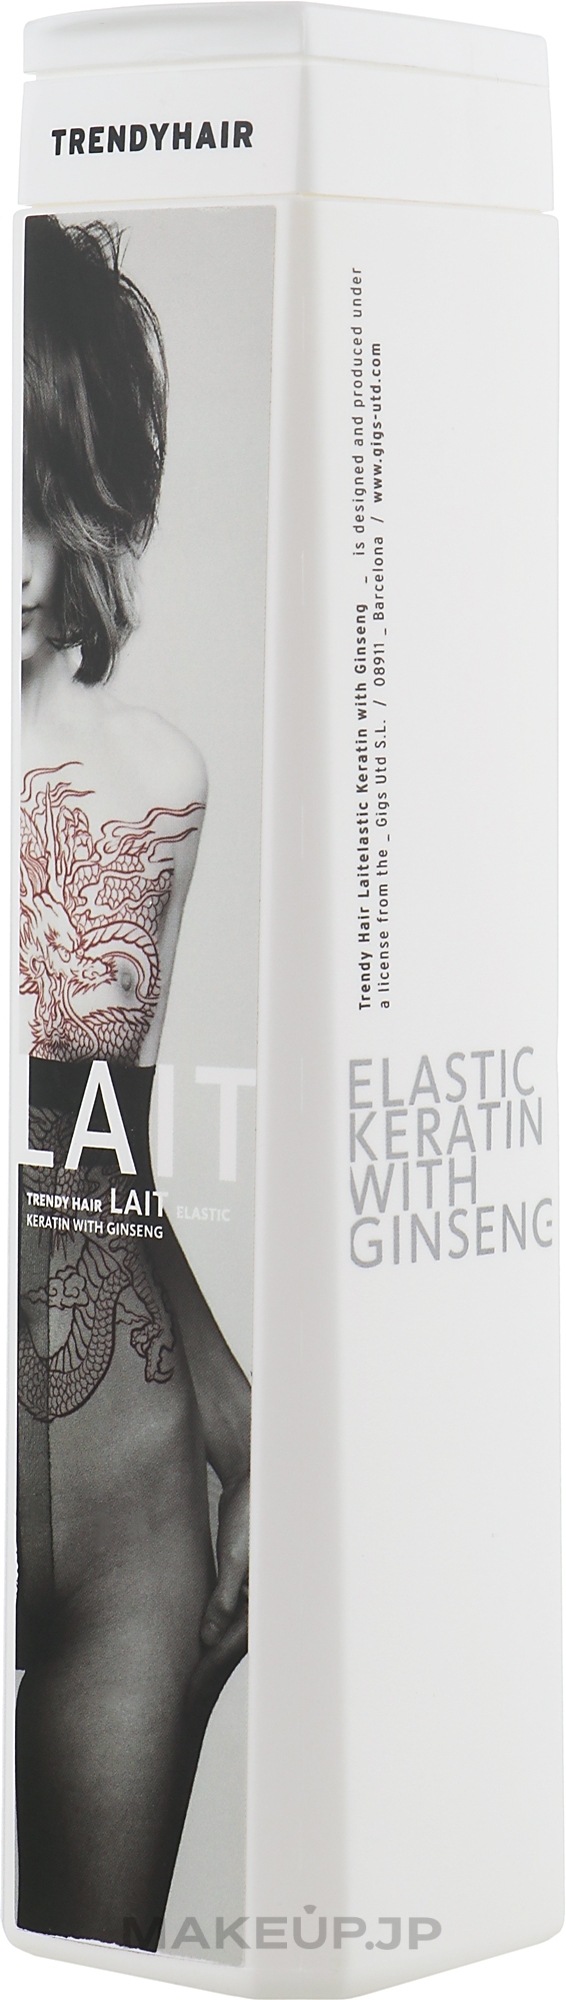 Hair Conditioner - Trendy Hair Lait Elastic Keratin With Ginseng — photo 300 ml